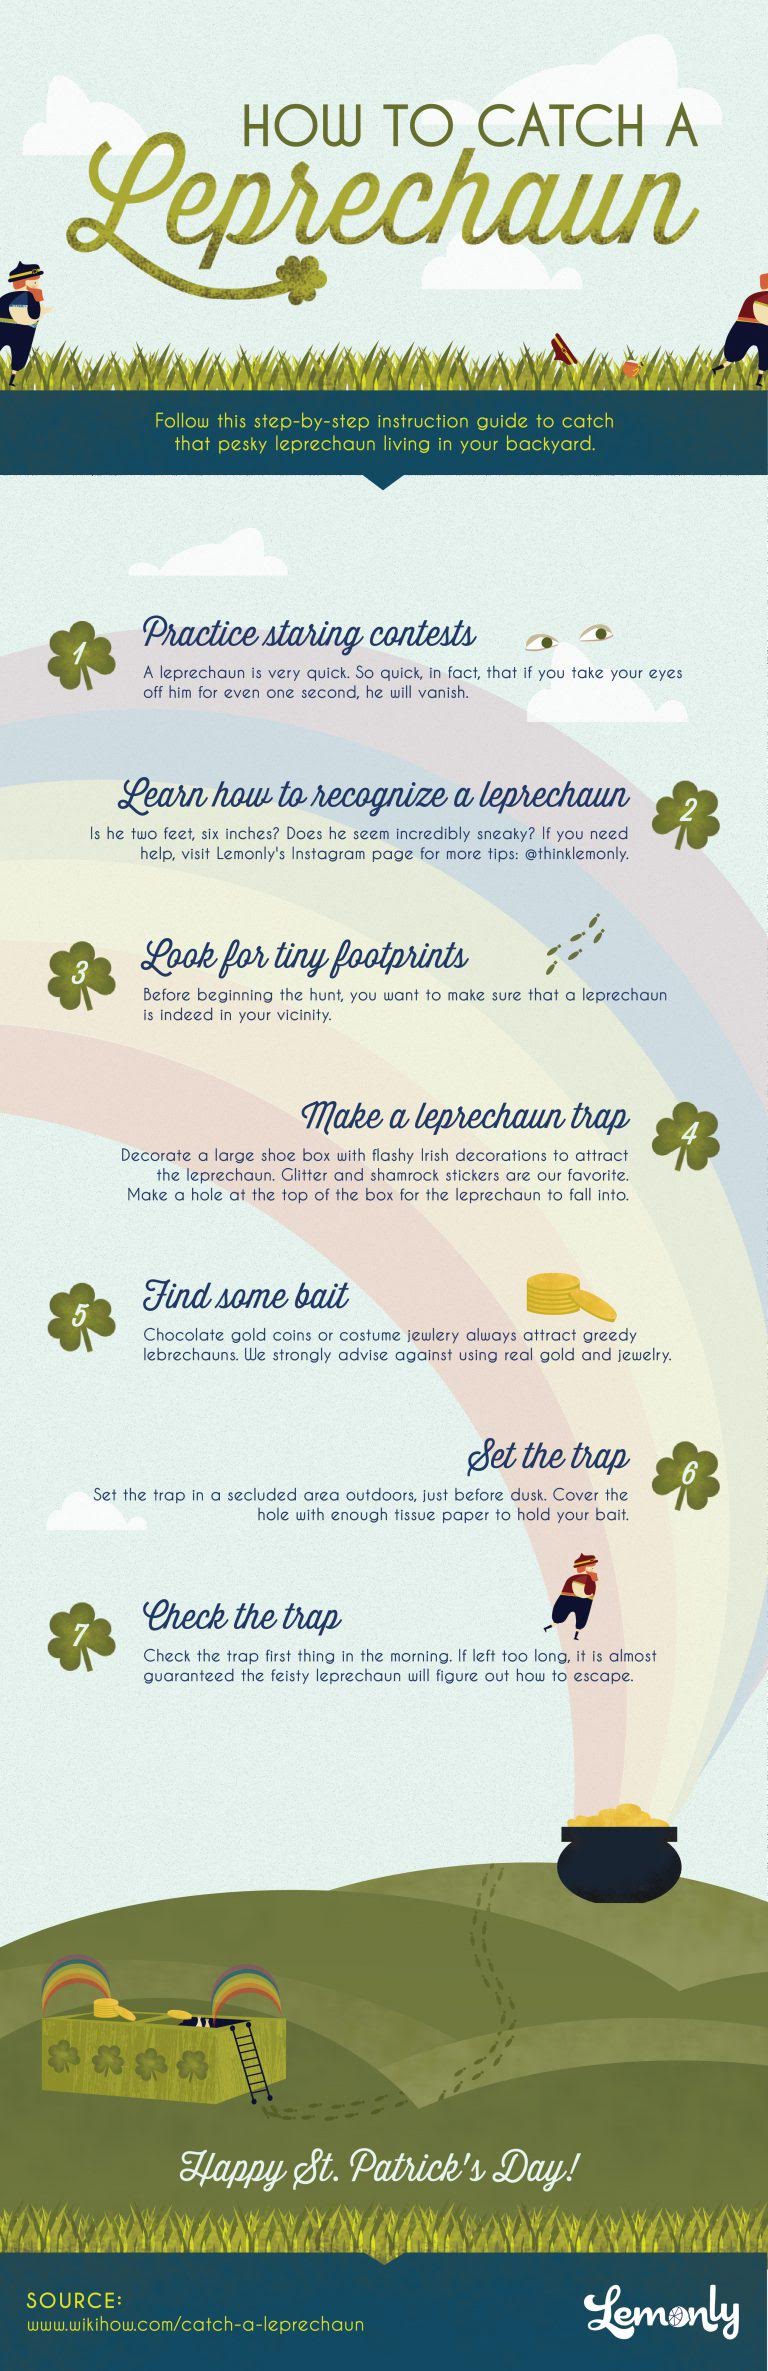 How To Catch A Leprechaun #infographic